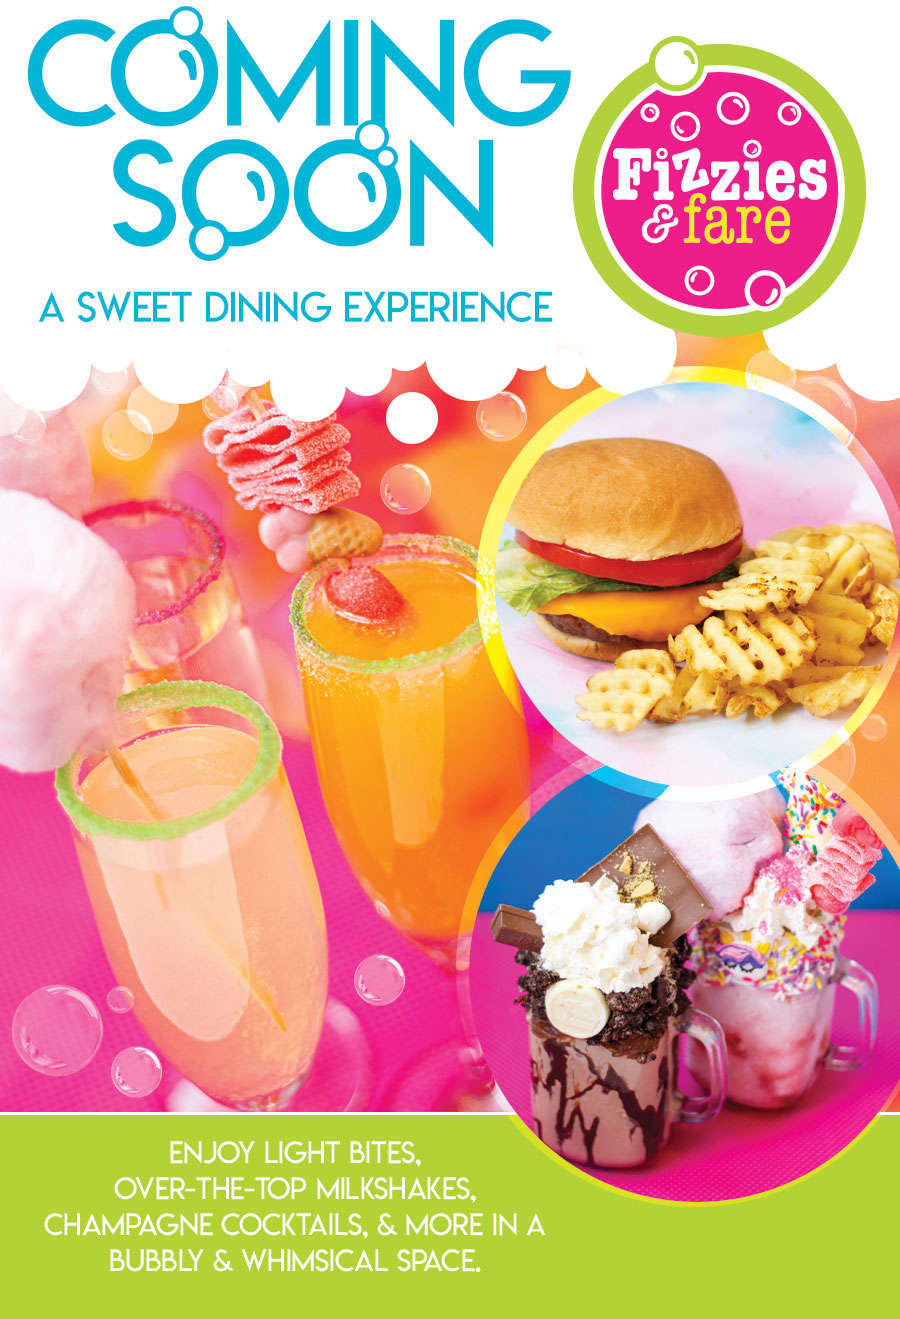 “Fizzies & Fare” is coming soon, according to the Sweet Pete’s website.